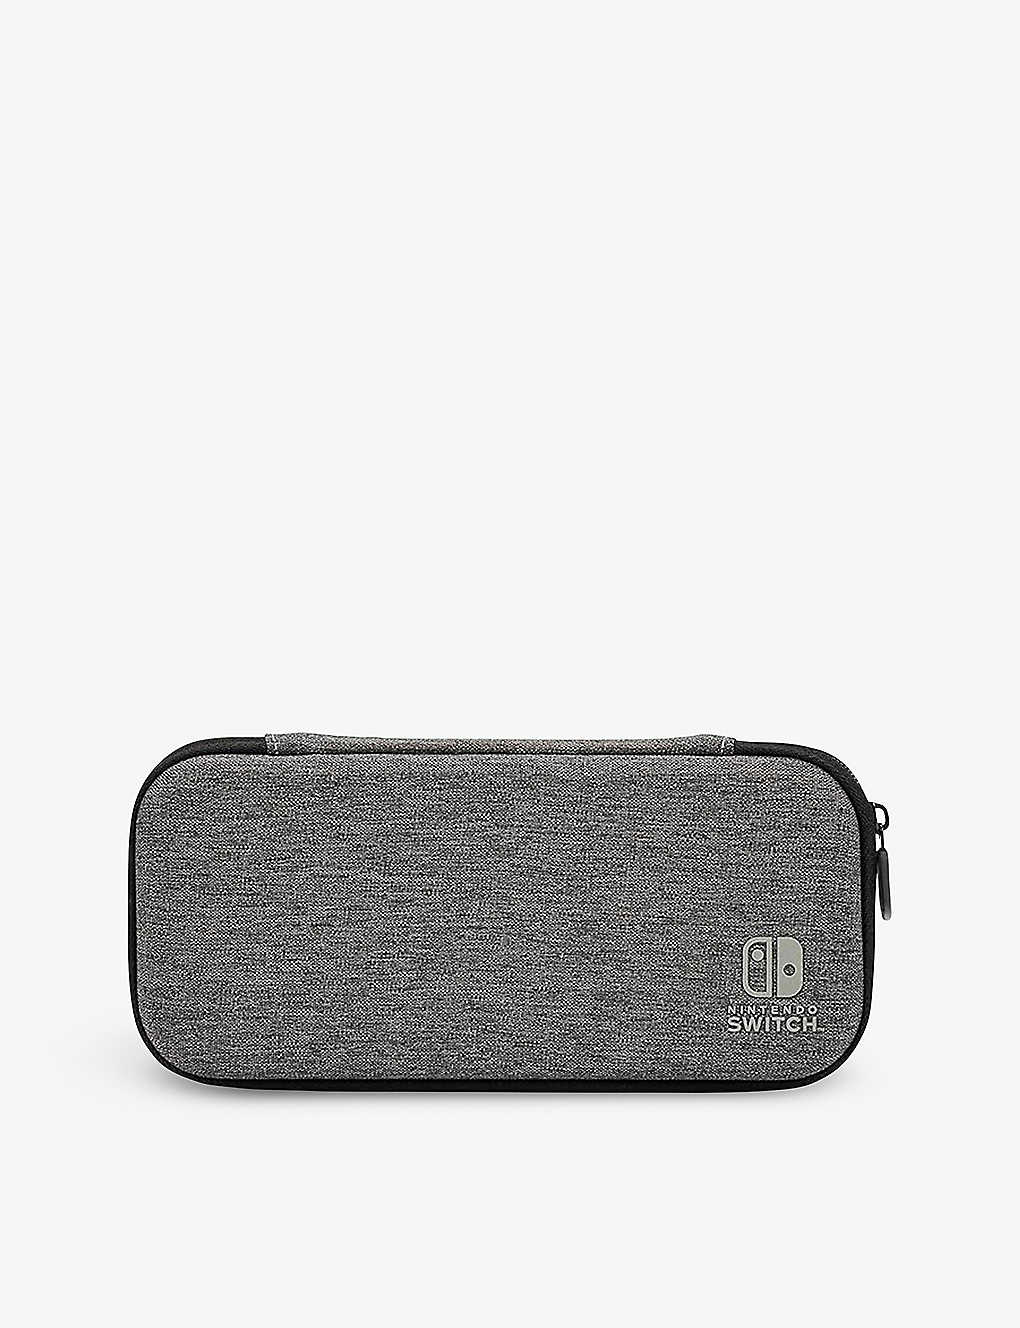 Powera Protection Case For Nintendo Switch In Grey